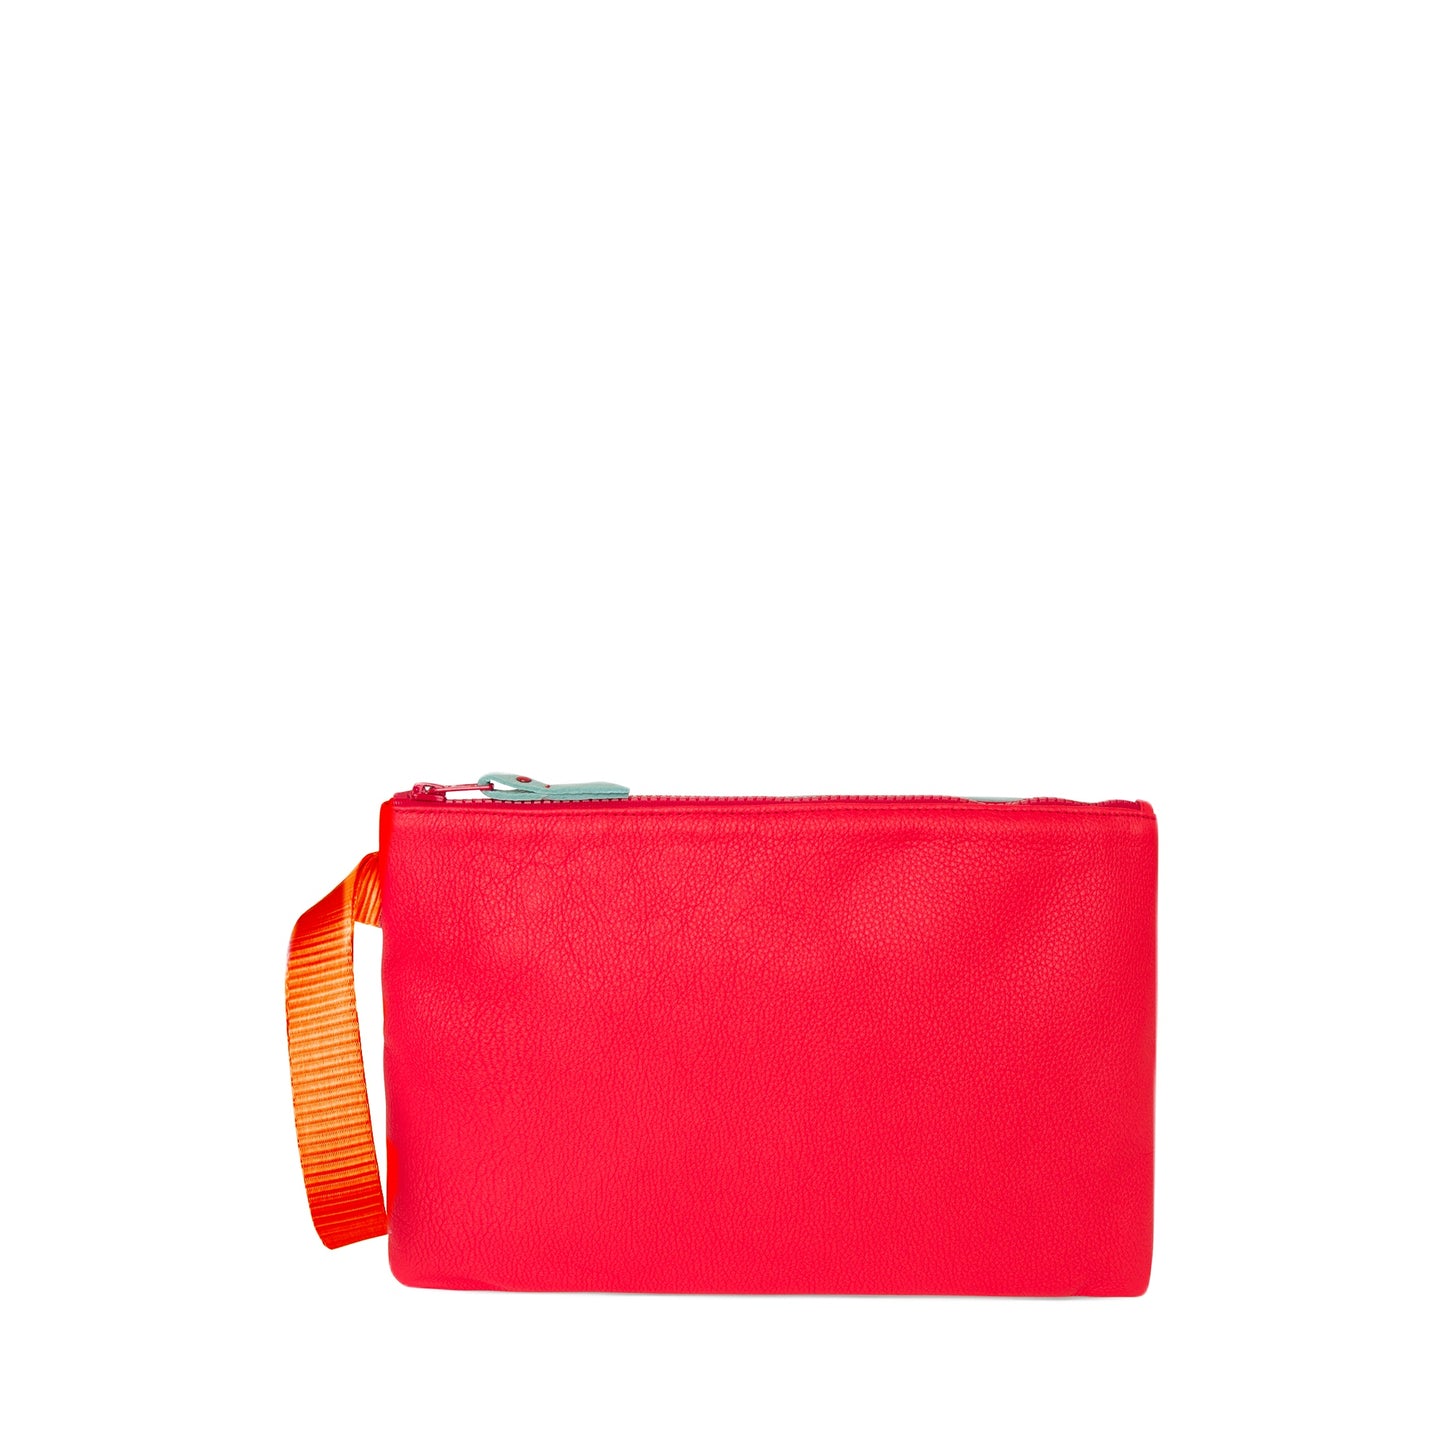 ZIP POUCH Blue and Red - M